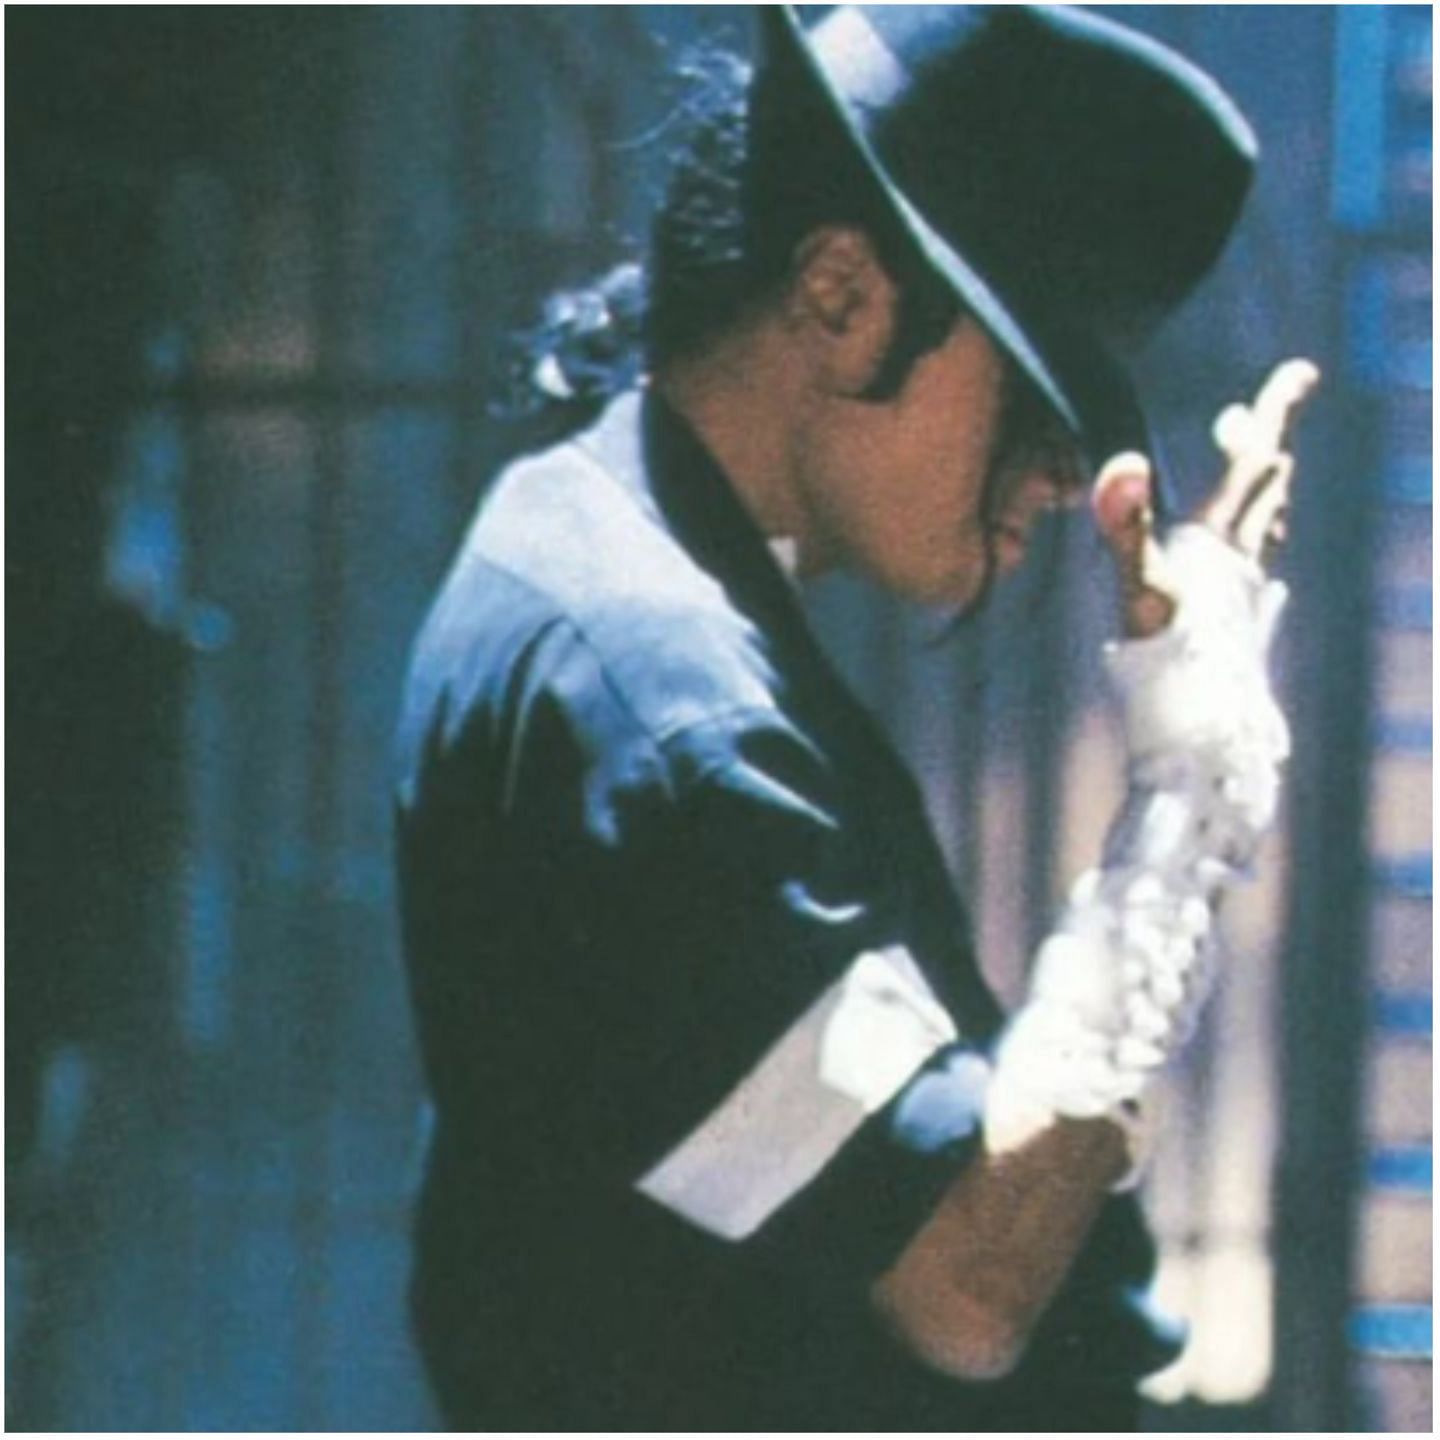 Jackson&#039;s 1987 hit Smooth Criminal is best known for his gravity-defying lean. (Image via Instagram @mj_fan.acc)